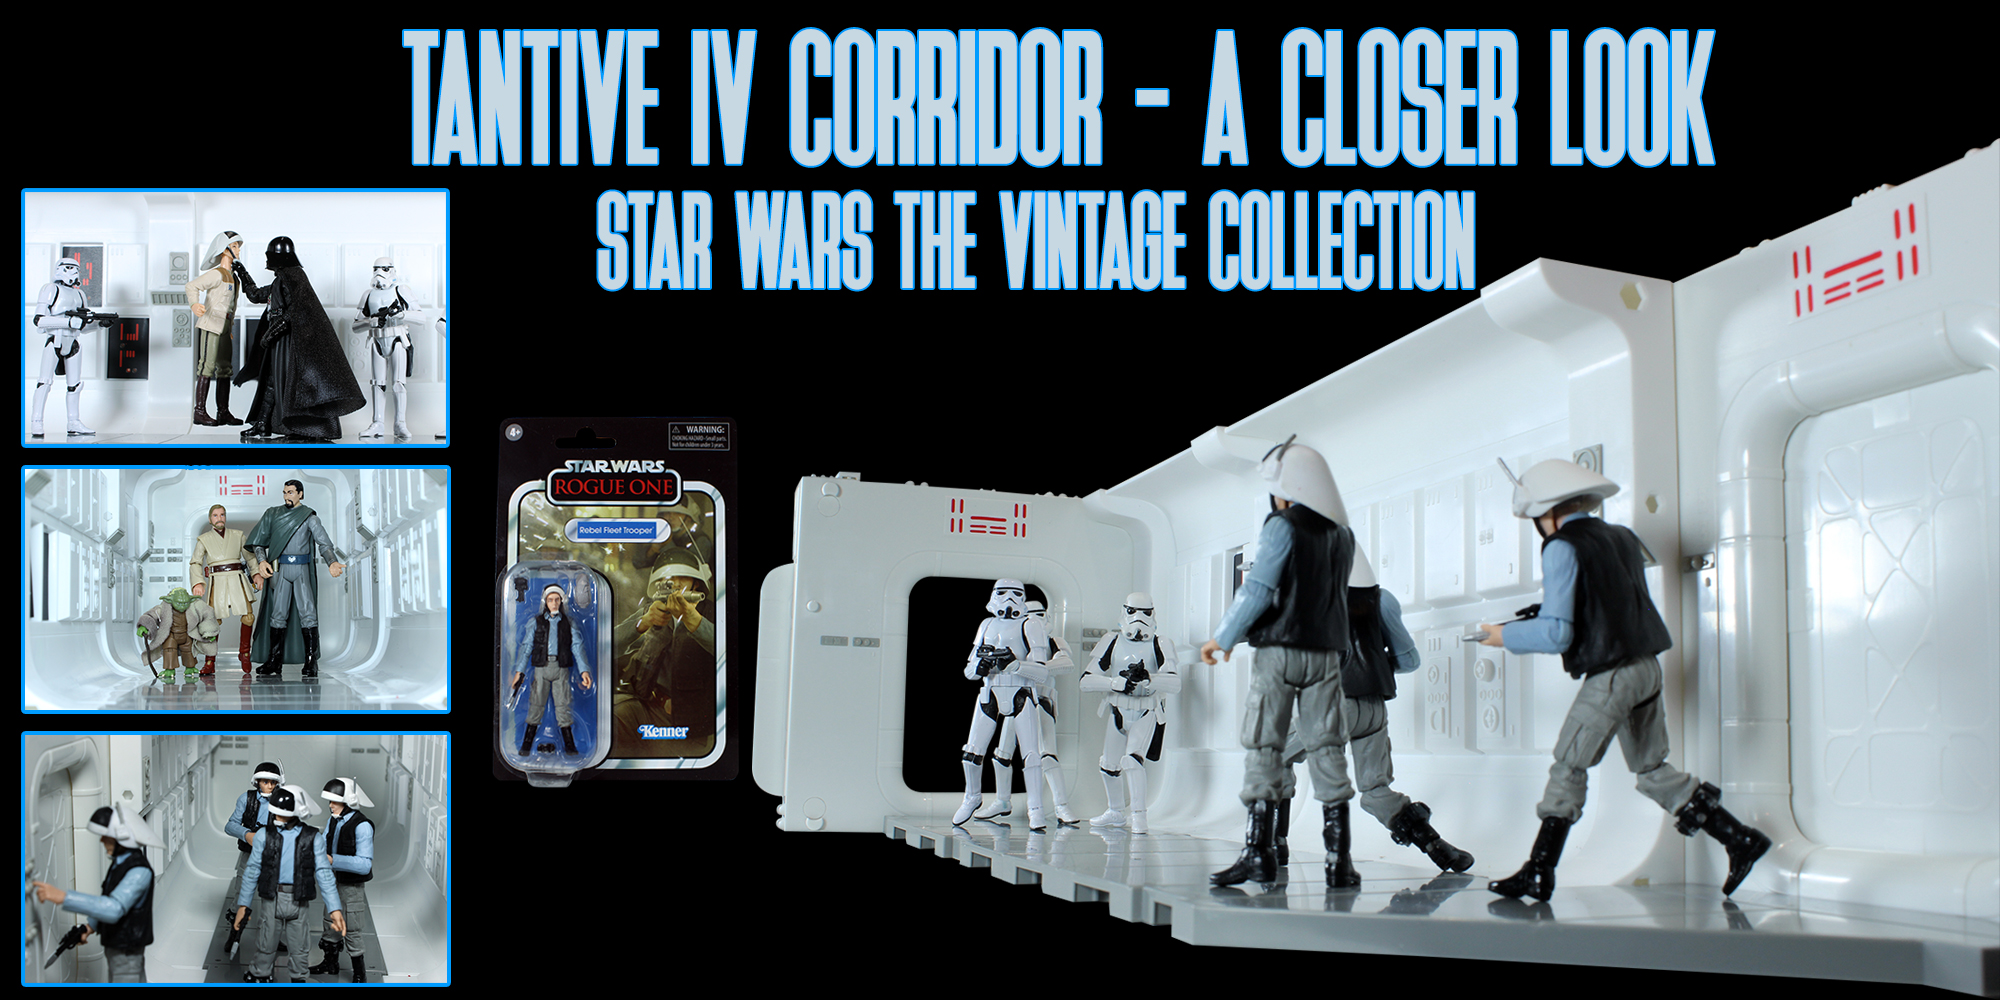 A Closer Look At The Vintage Collection Tantive IV Corridor